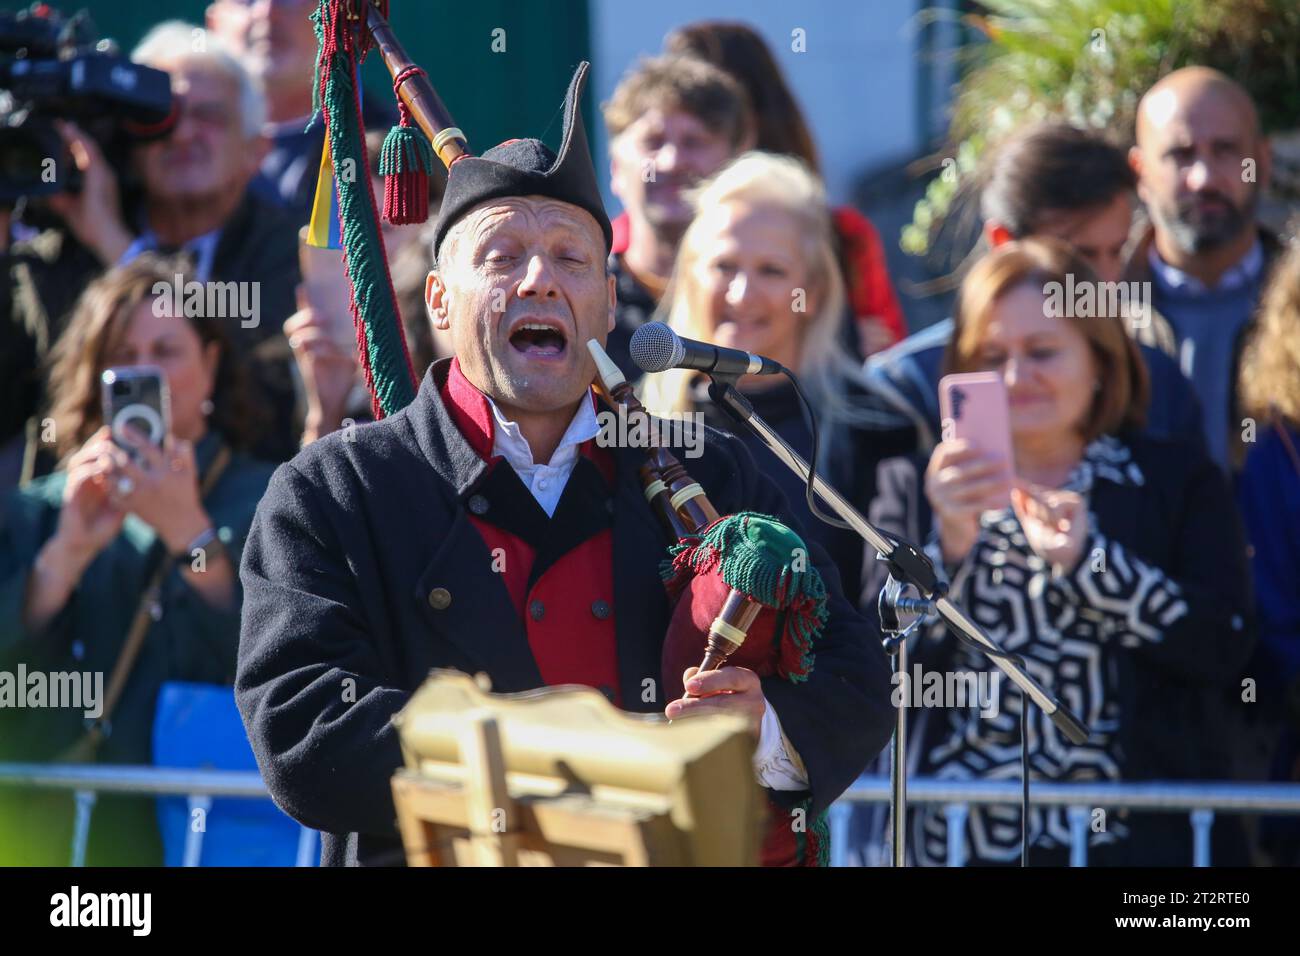 Arroes, Spain, 21st October 2023: A bagpiper playing for the Royal Family during the 2023 Exemplary Town of Asturias Award, on October 21, 2023, in Arroes, Spain. Credit: Alberto Brevers / Alamy Live News. Stock Photo